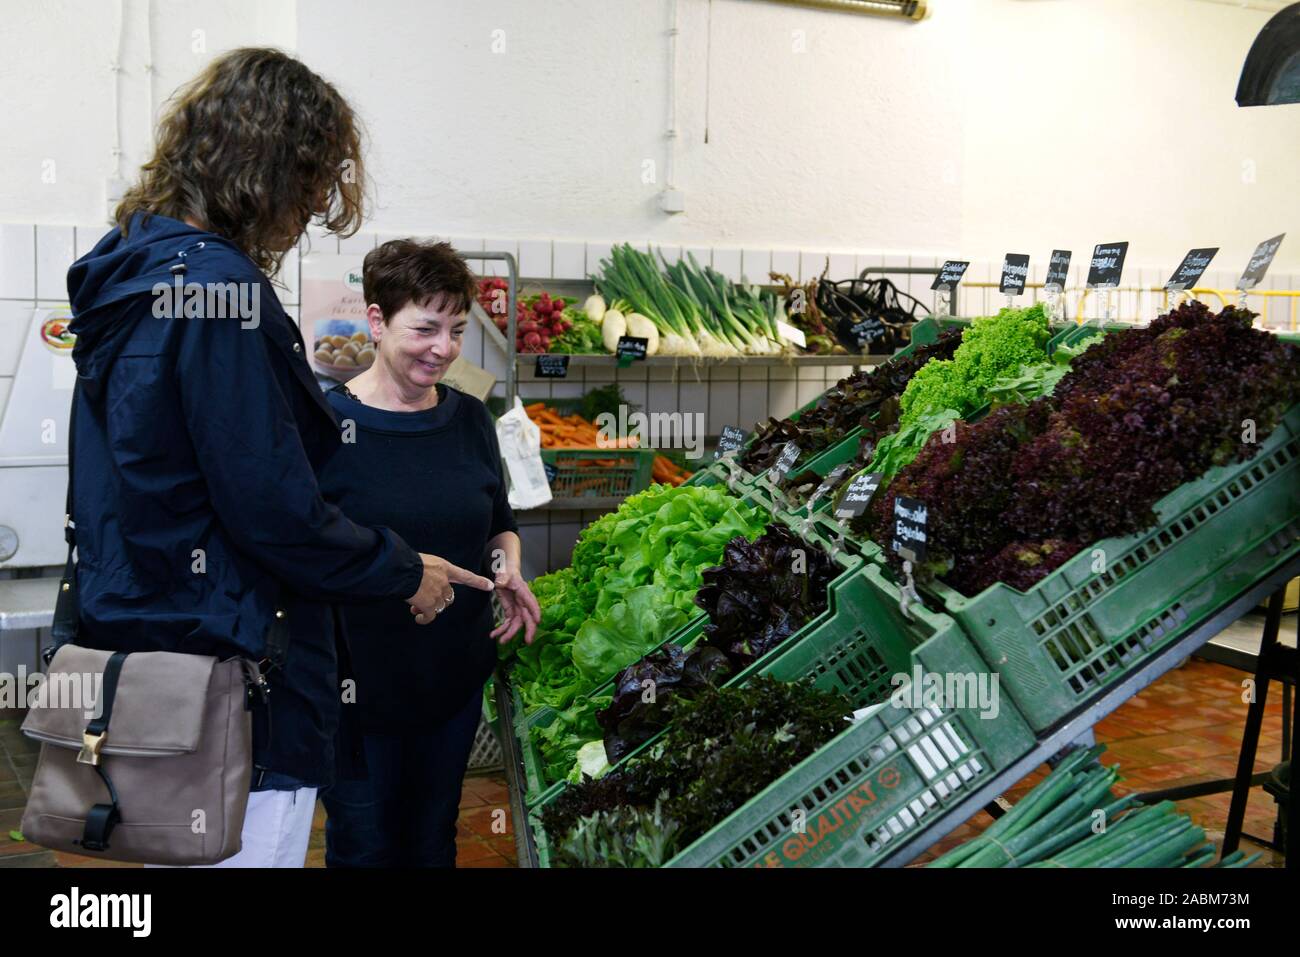 Elisabeth Schamberger, the managing director of the family-run vegetable farm, advises a customer. [automated translation] Stock Photo